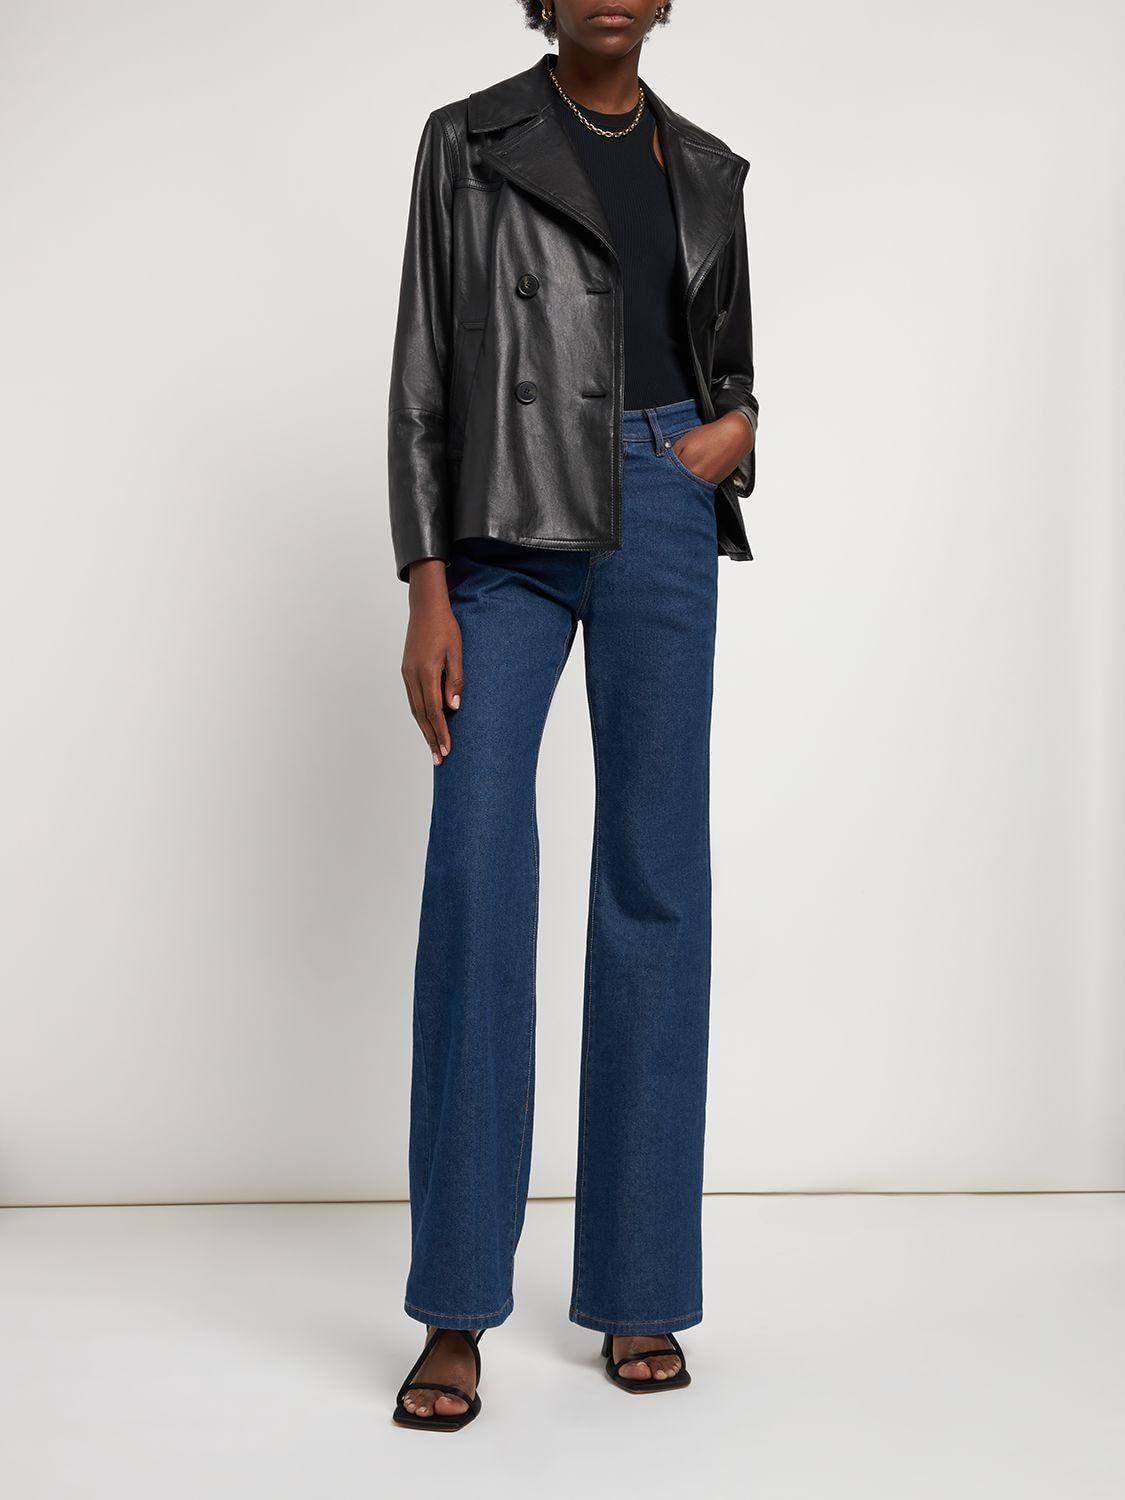 Weekend by Maxmara Cosa Double Breasted Leather Jacket in Black | Lyst